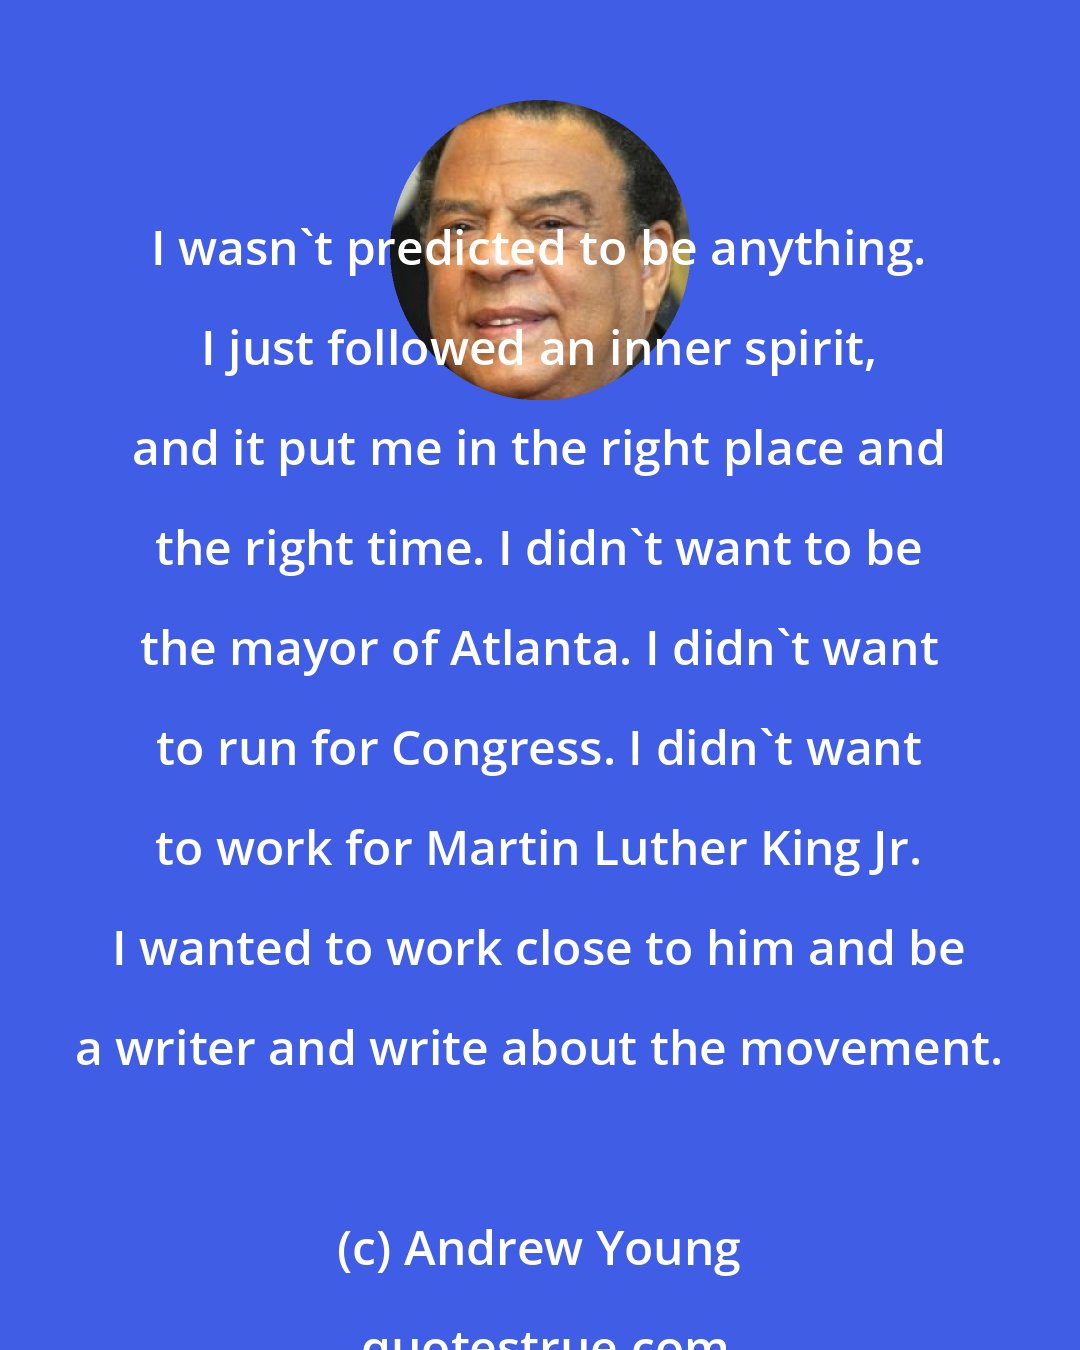 Andrew Young: I wasn't predicted to be anything. I just followed an inner spirit, and it put me in the right place and the right time. I didn't want to be the mayor of Atlanta. I didn't want to run for Congress. I didn't want to work for Martin Luther King Jr. I wanted to work close to him and be a writer and write about the movement.